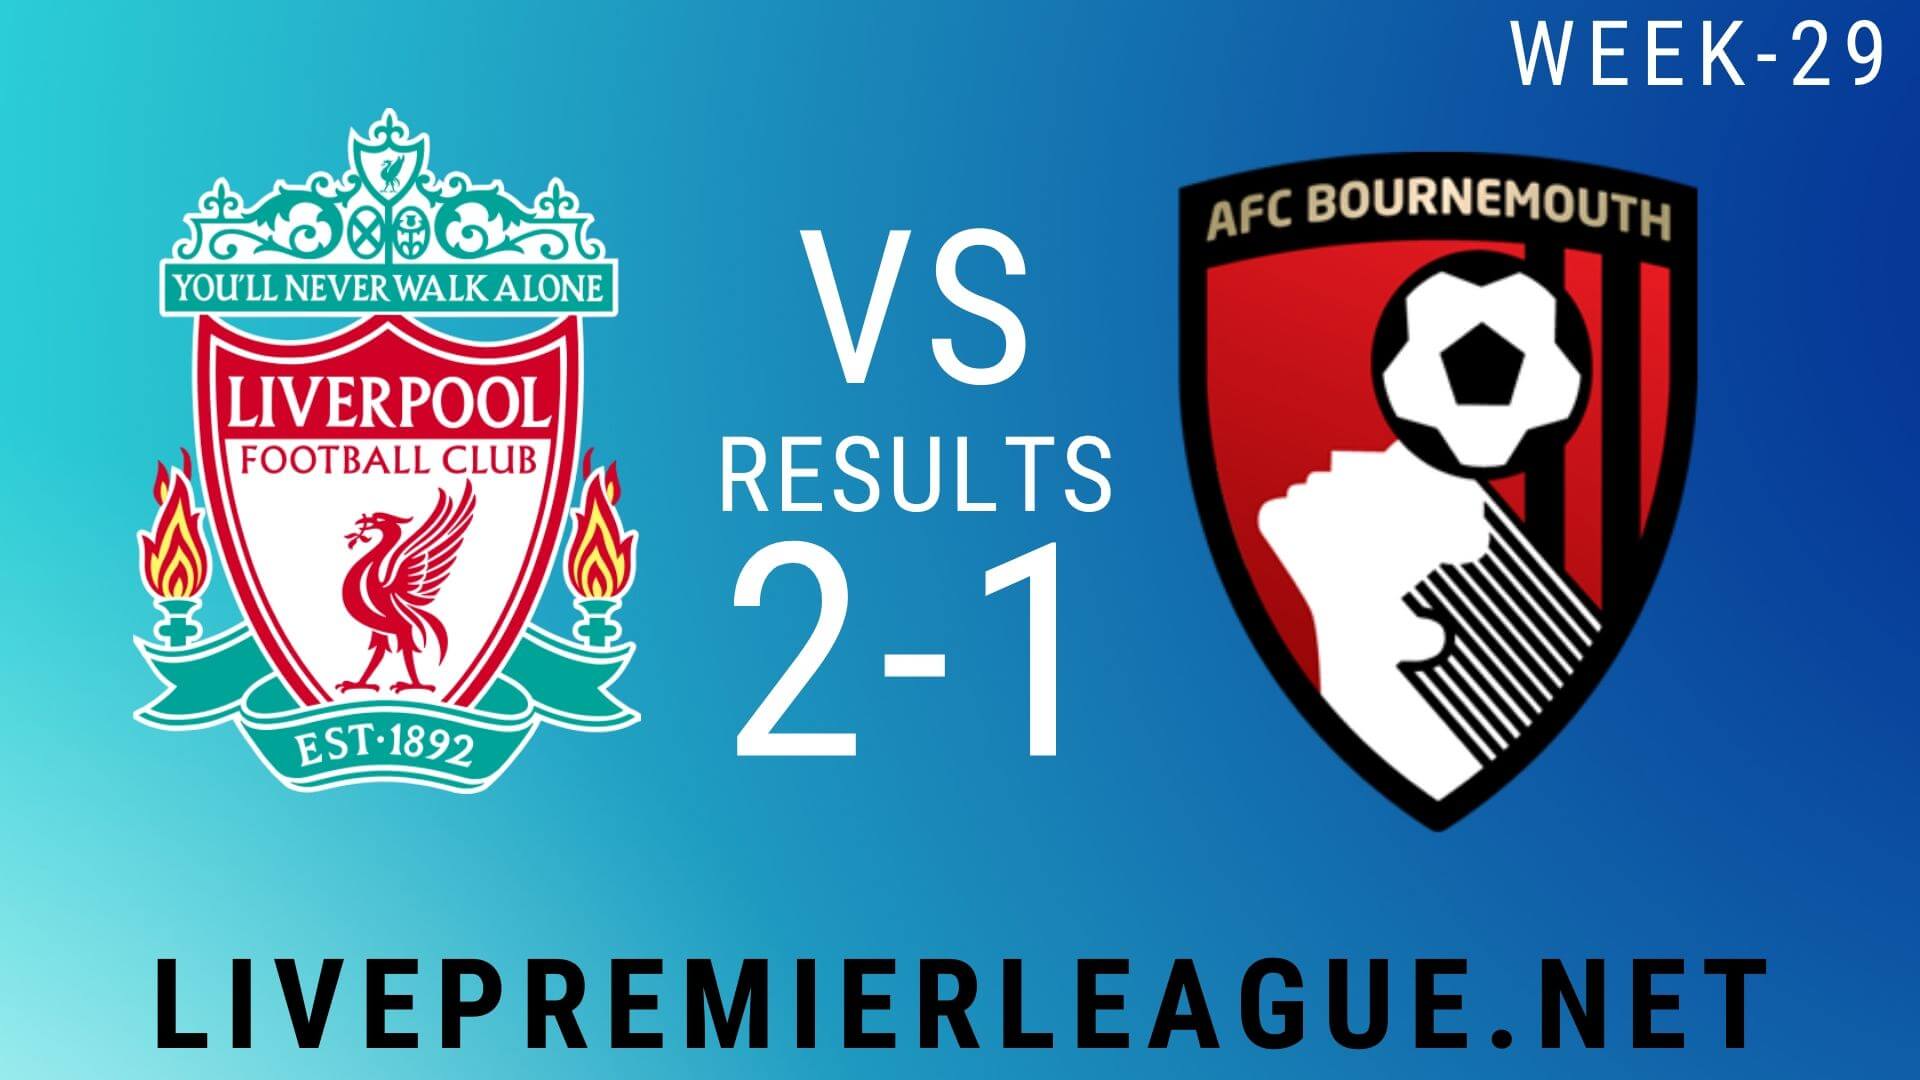 Liverpool Vs AFC Bournemouth | Week 28 Result 2020